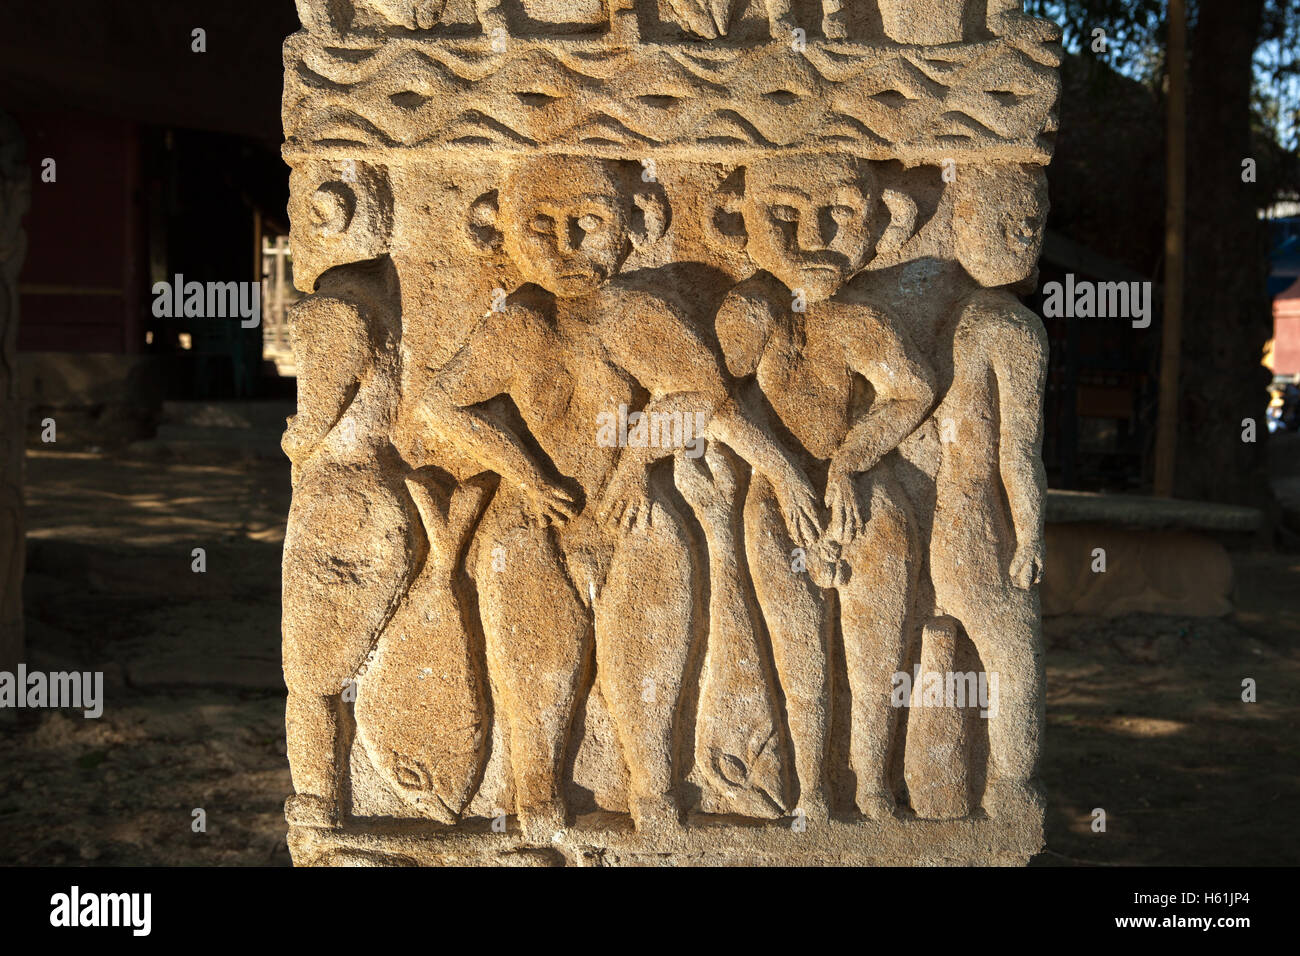 Human figures carved on stone, a cultural object in traditional village of Prailiu in Kambera, East Sumba, East Nusa Tenggara, Indonesia. Stock Photo